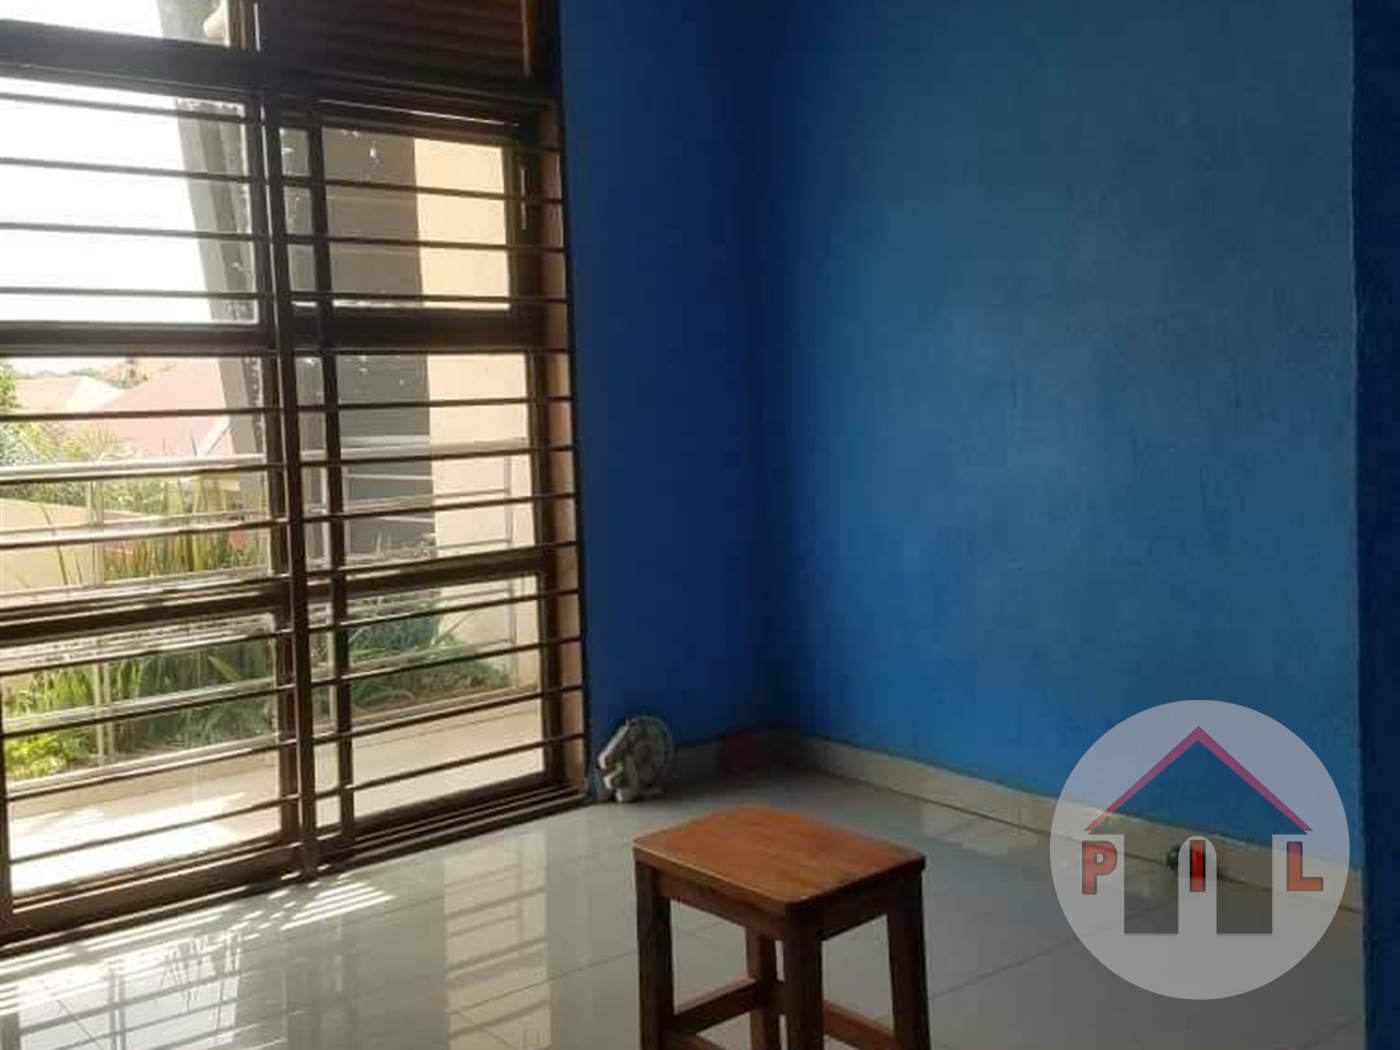 Town House for sale in Kyanja Kampala